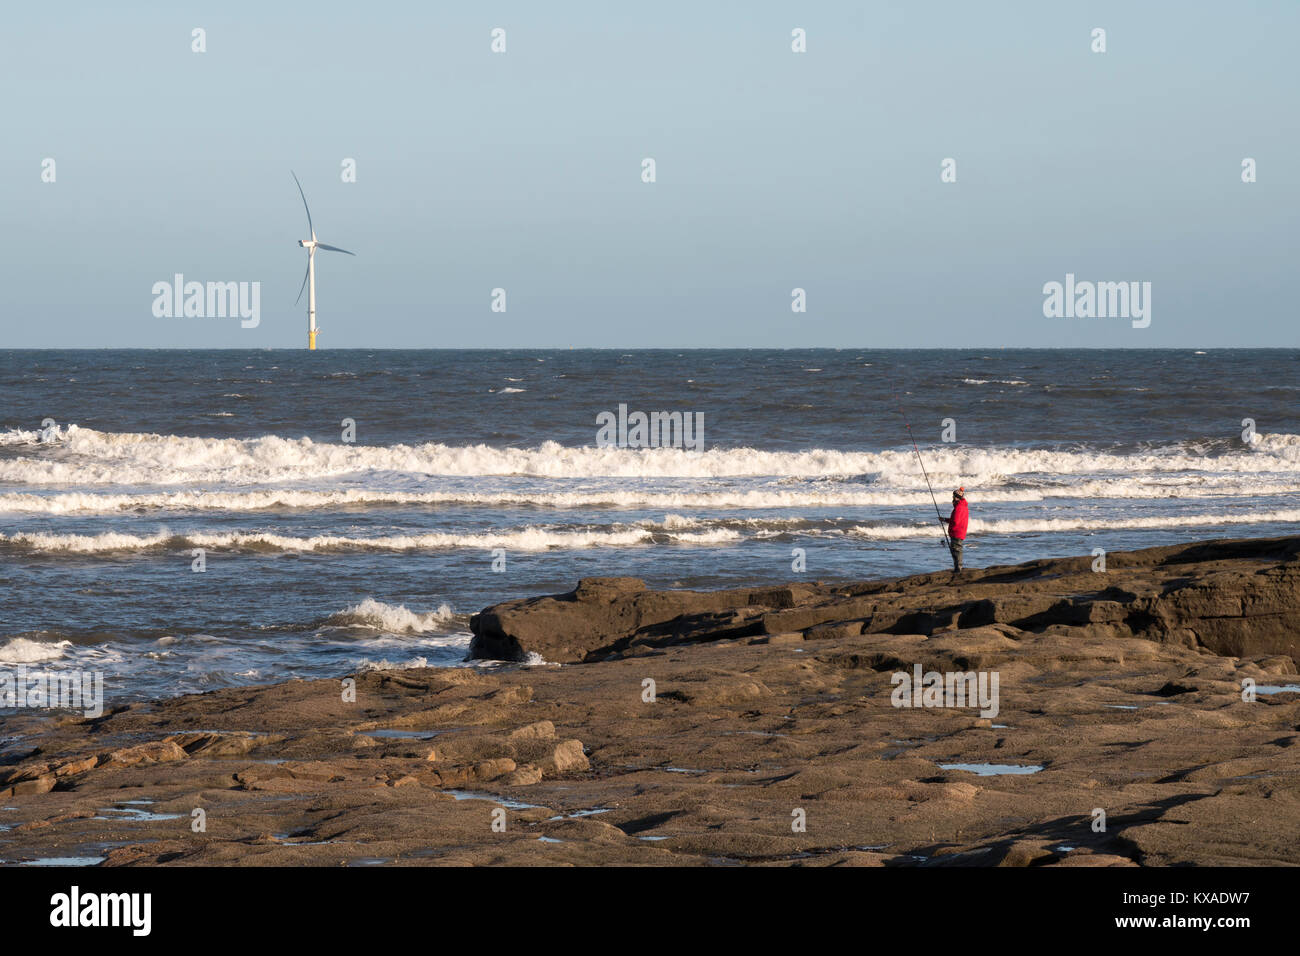 An angler fishing with rod and line just north of Seaton Sluice, with a wind turbine in the background, Northumberland, England, UK Stock Photo